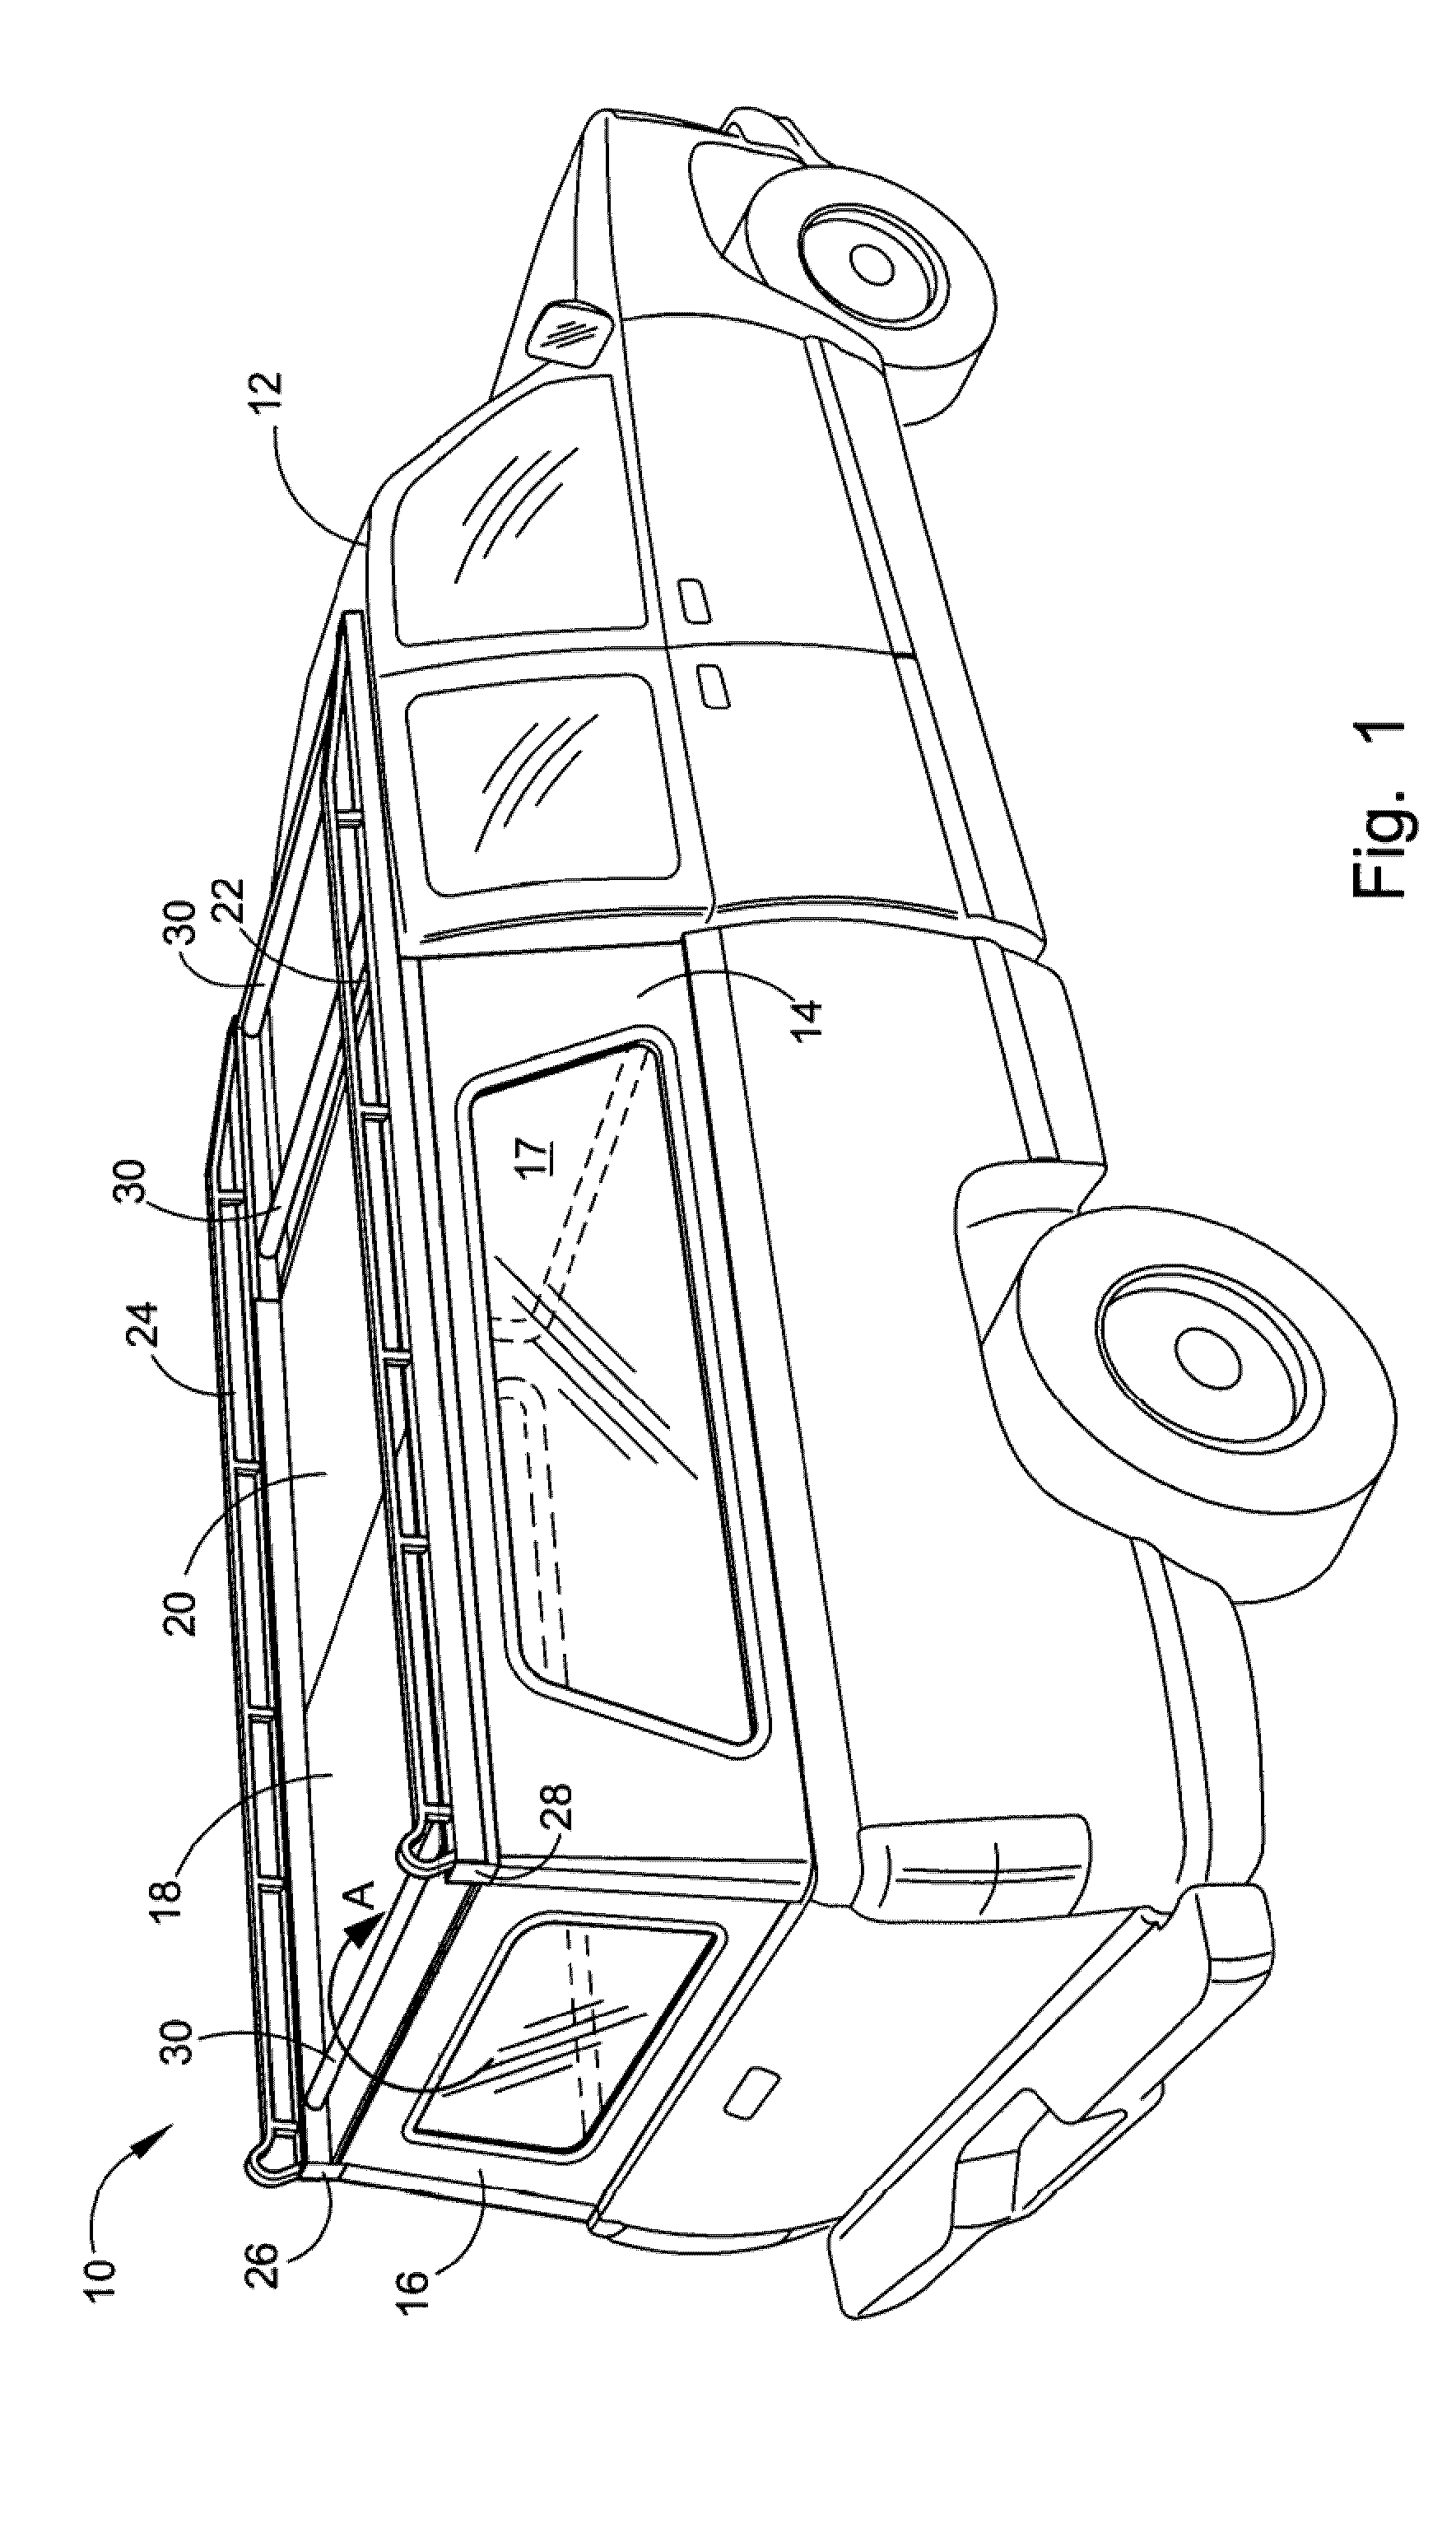 Retractable roof system for vehicles